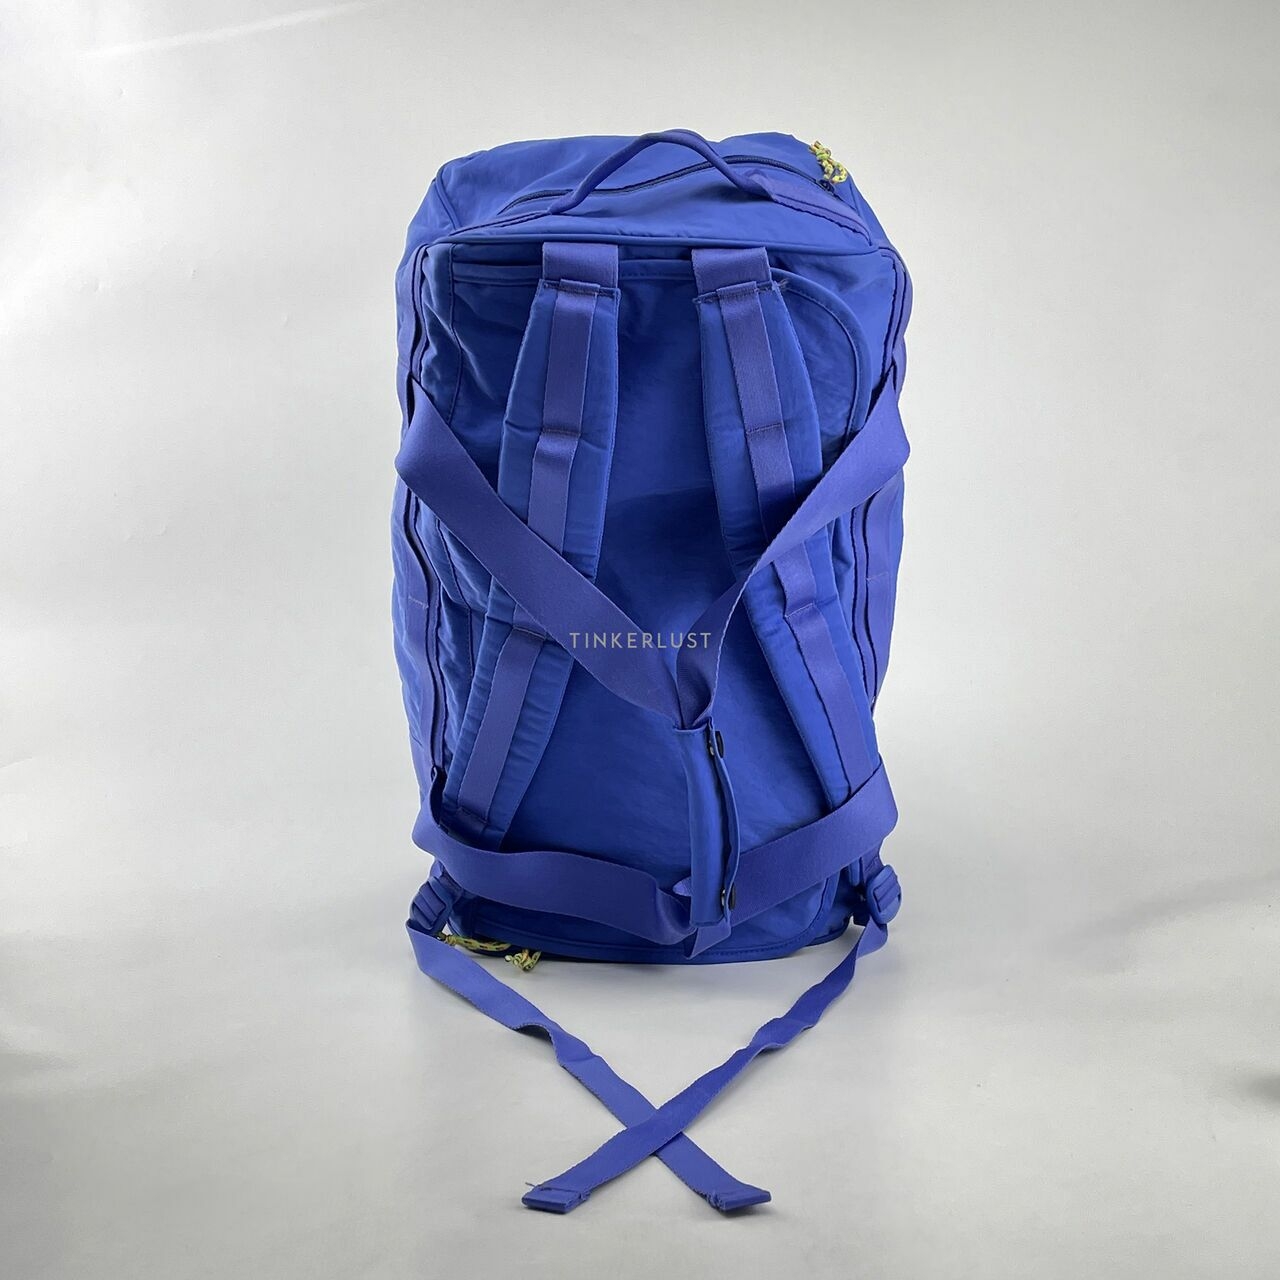 Exsport Blue Luggage and Travel